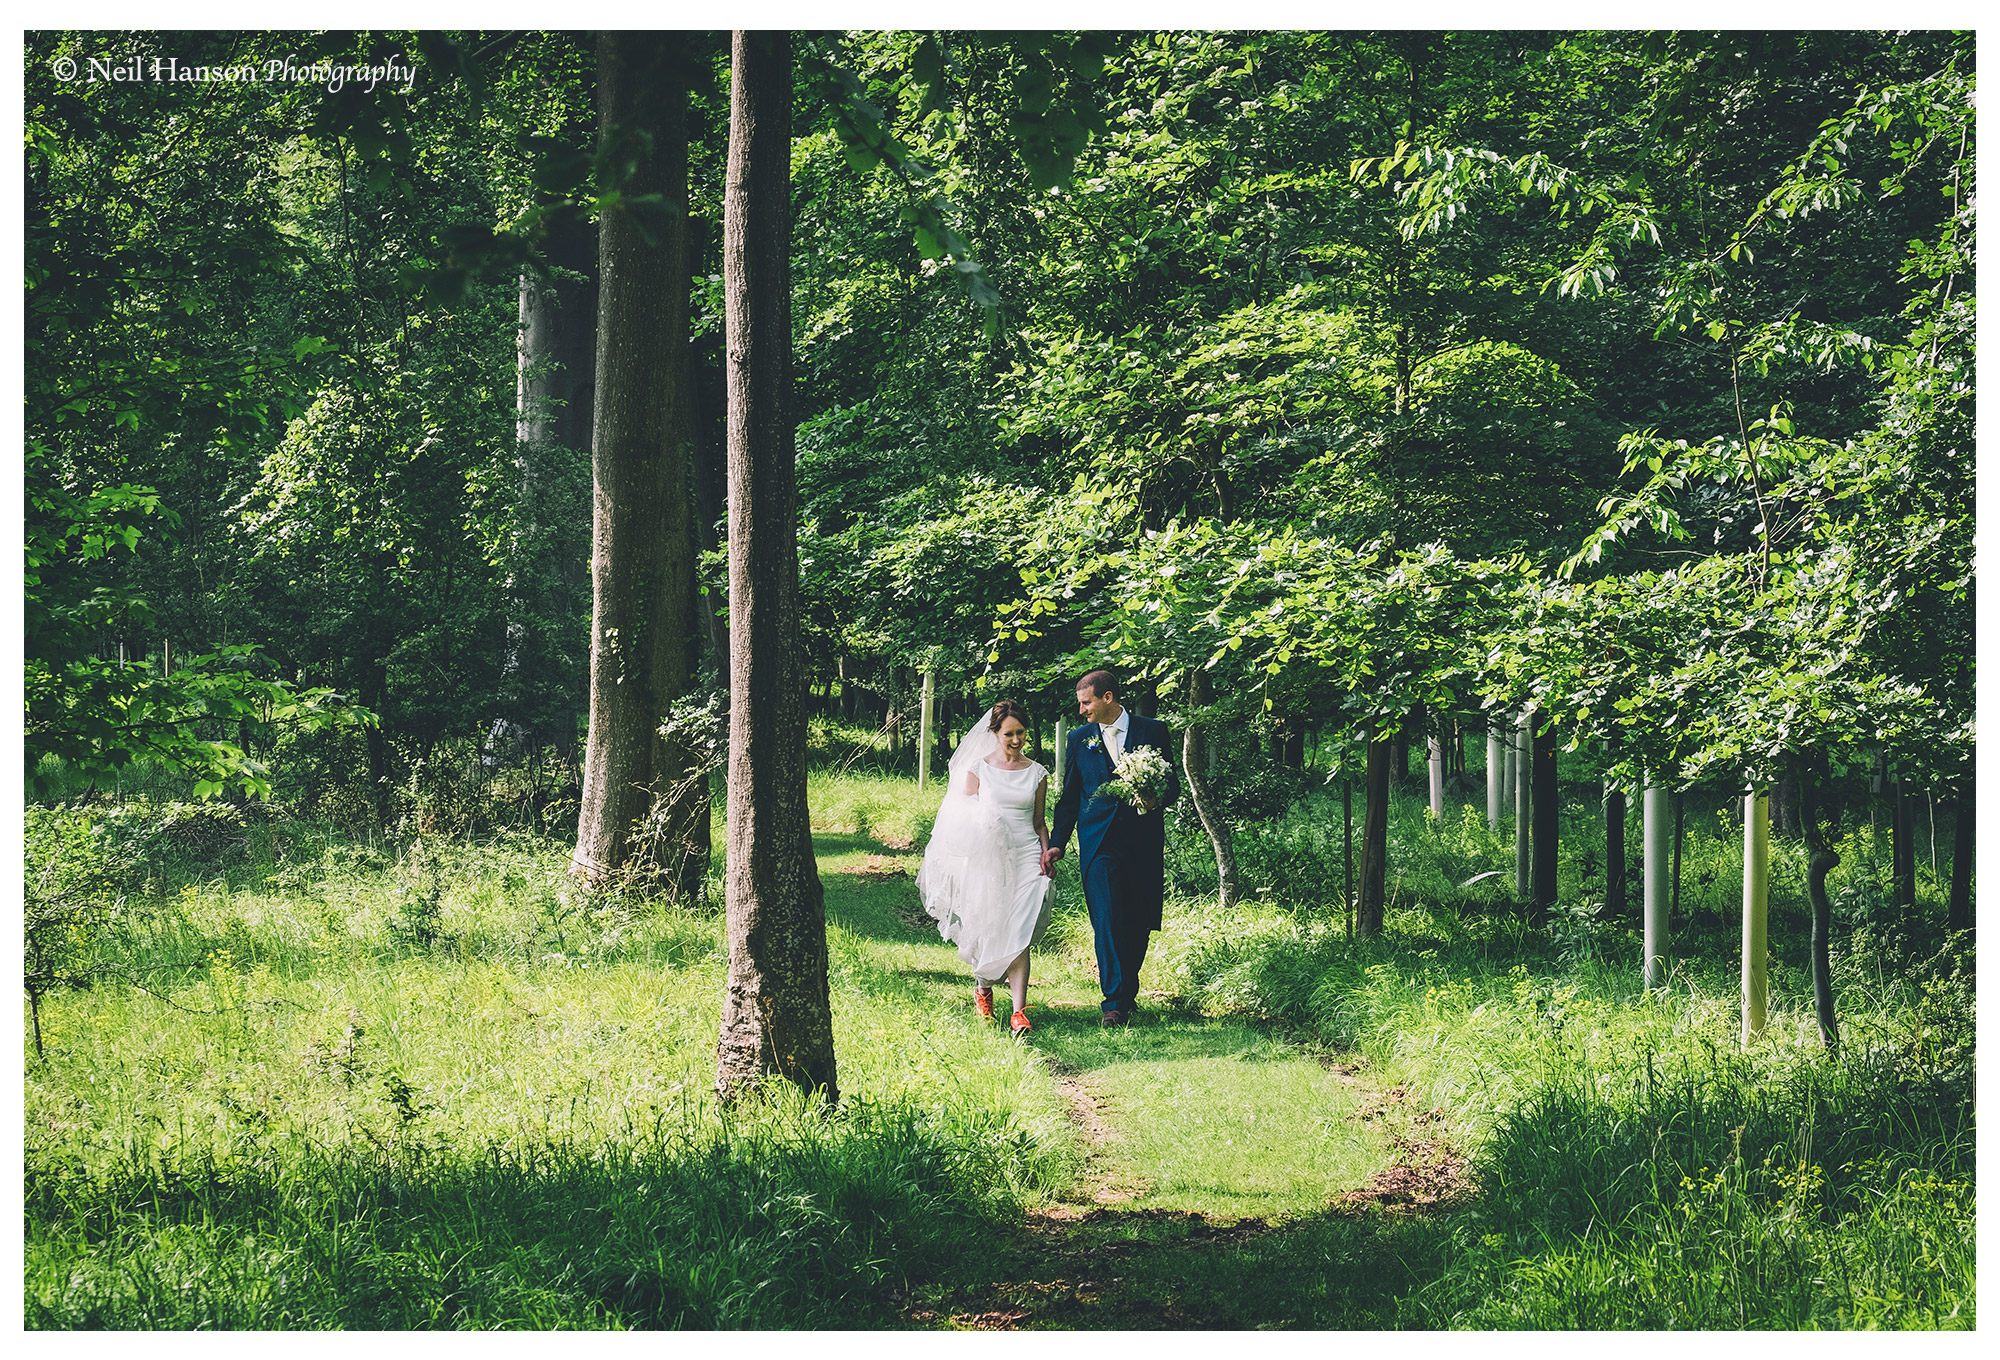 Newley married couple walk in the woods